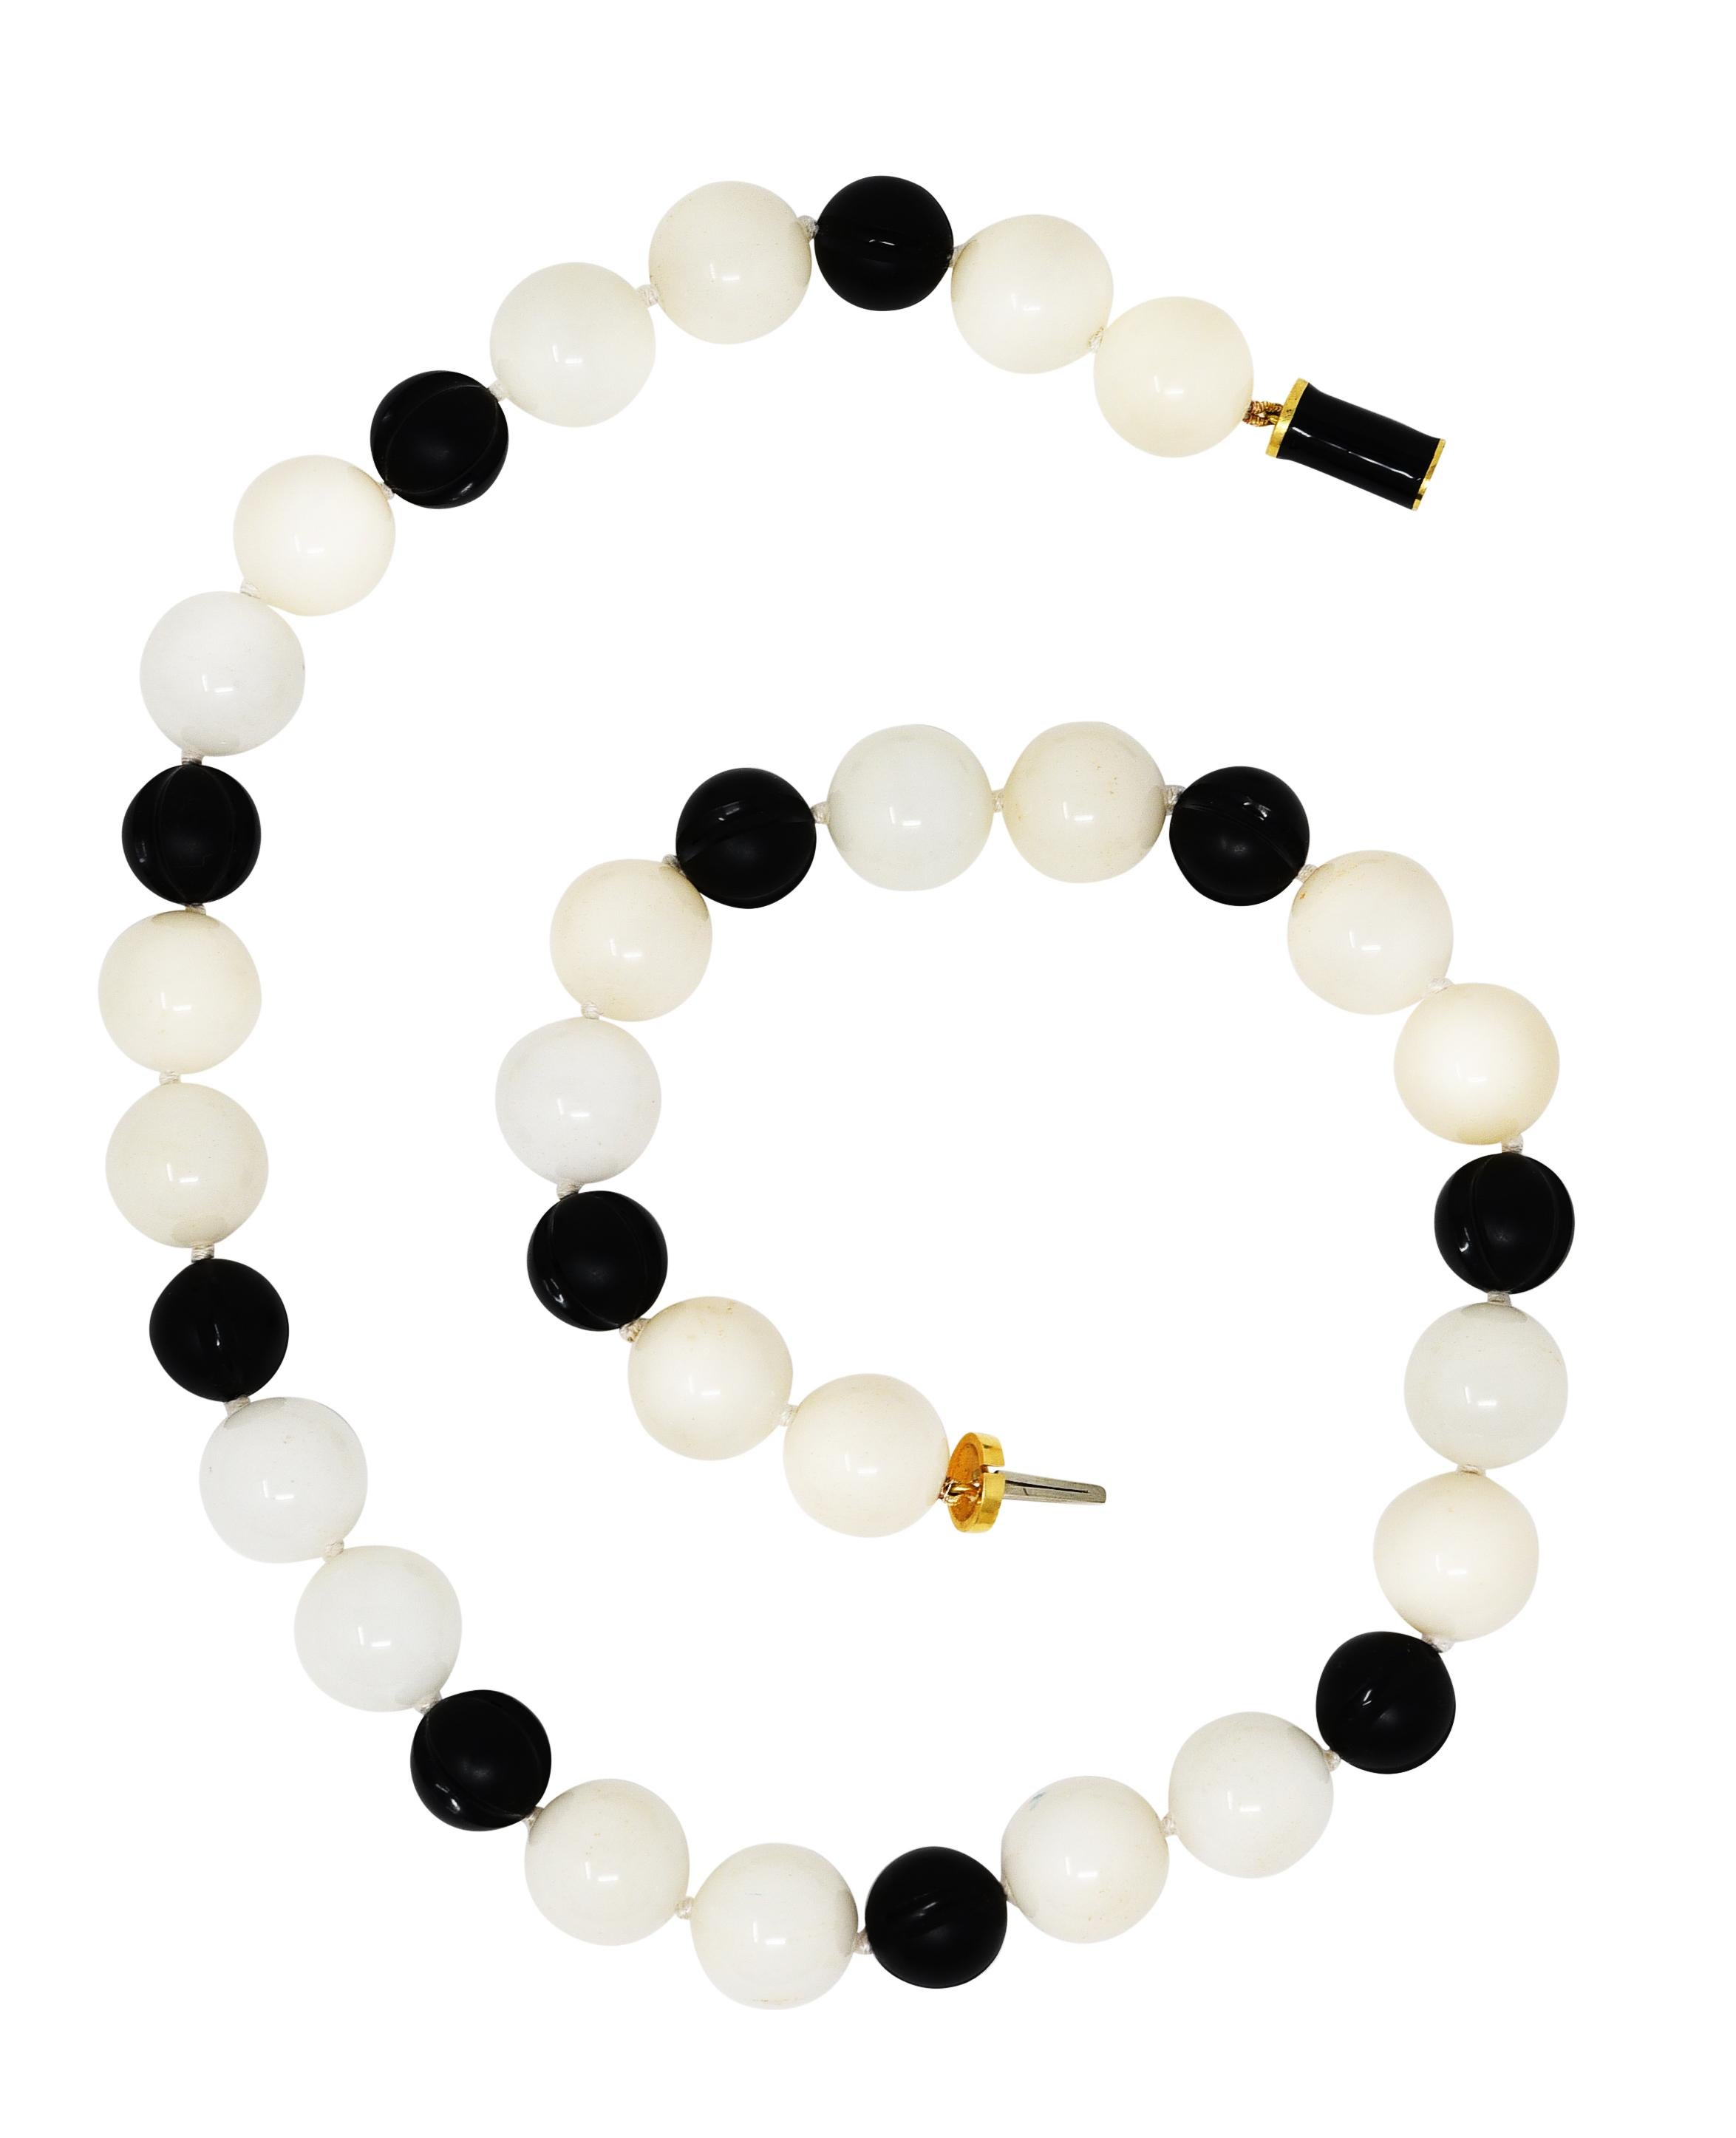 Necklace is comprised of onyx and rock crystal quartz round beads strung on knotted silk cord. Onyx beads are 13.0 mm round - opaque matte black in color with polished carved linear grooves. Rock crystal quartz are 16.0 mm round - translucent cream